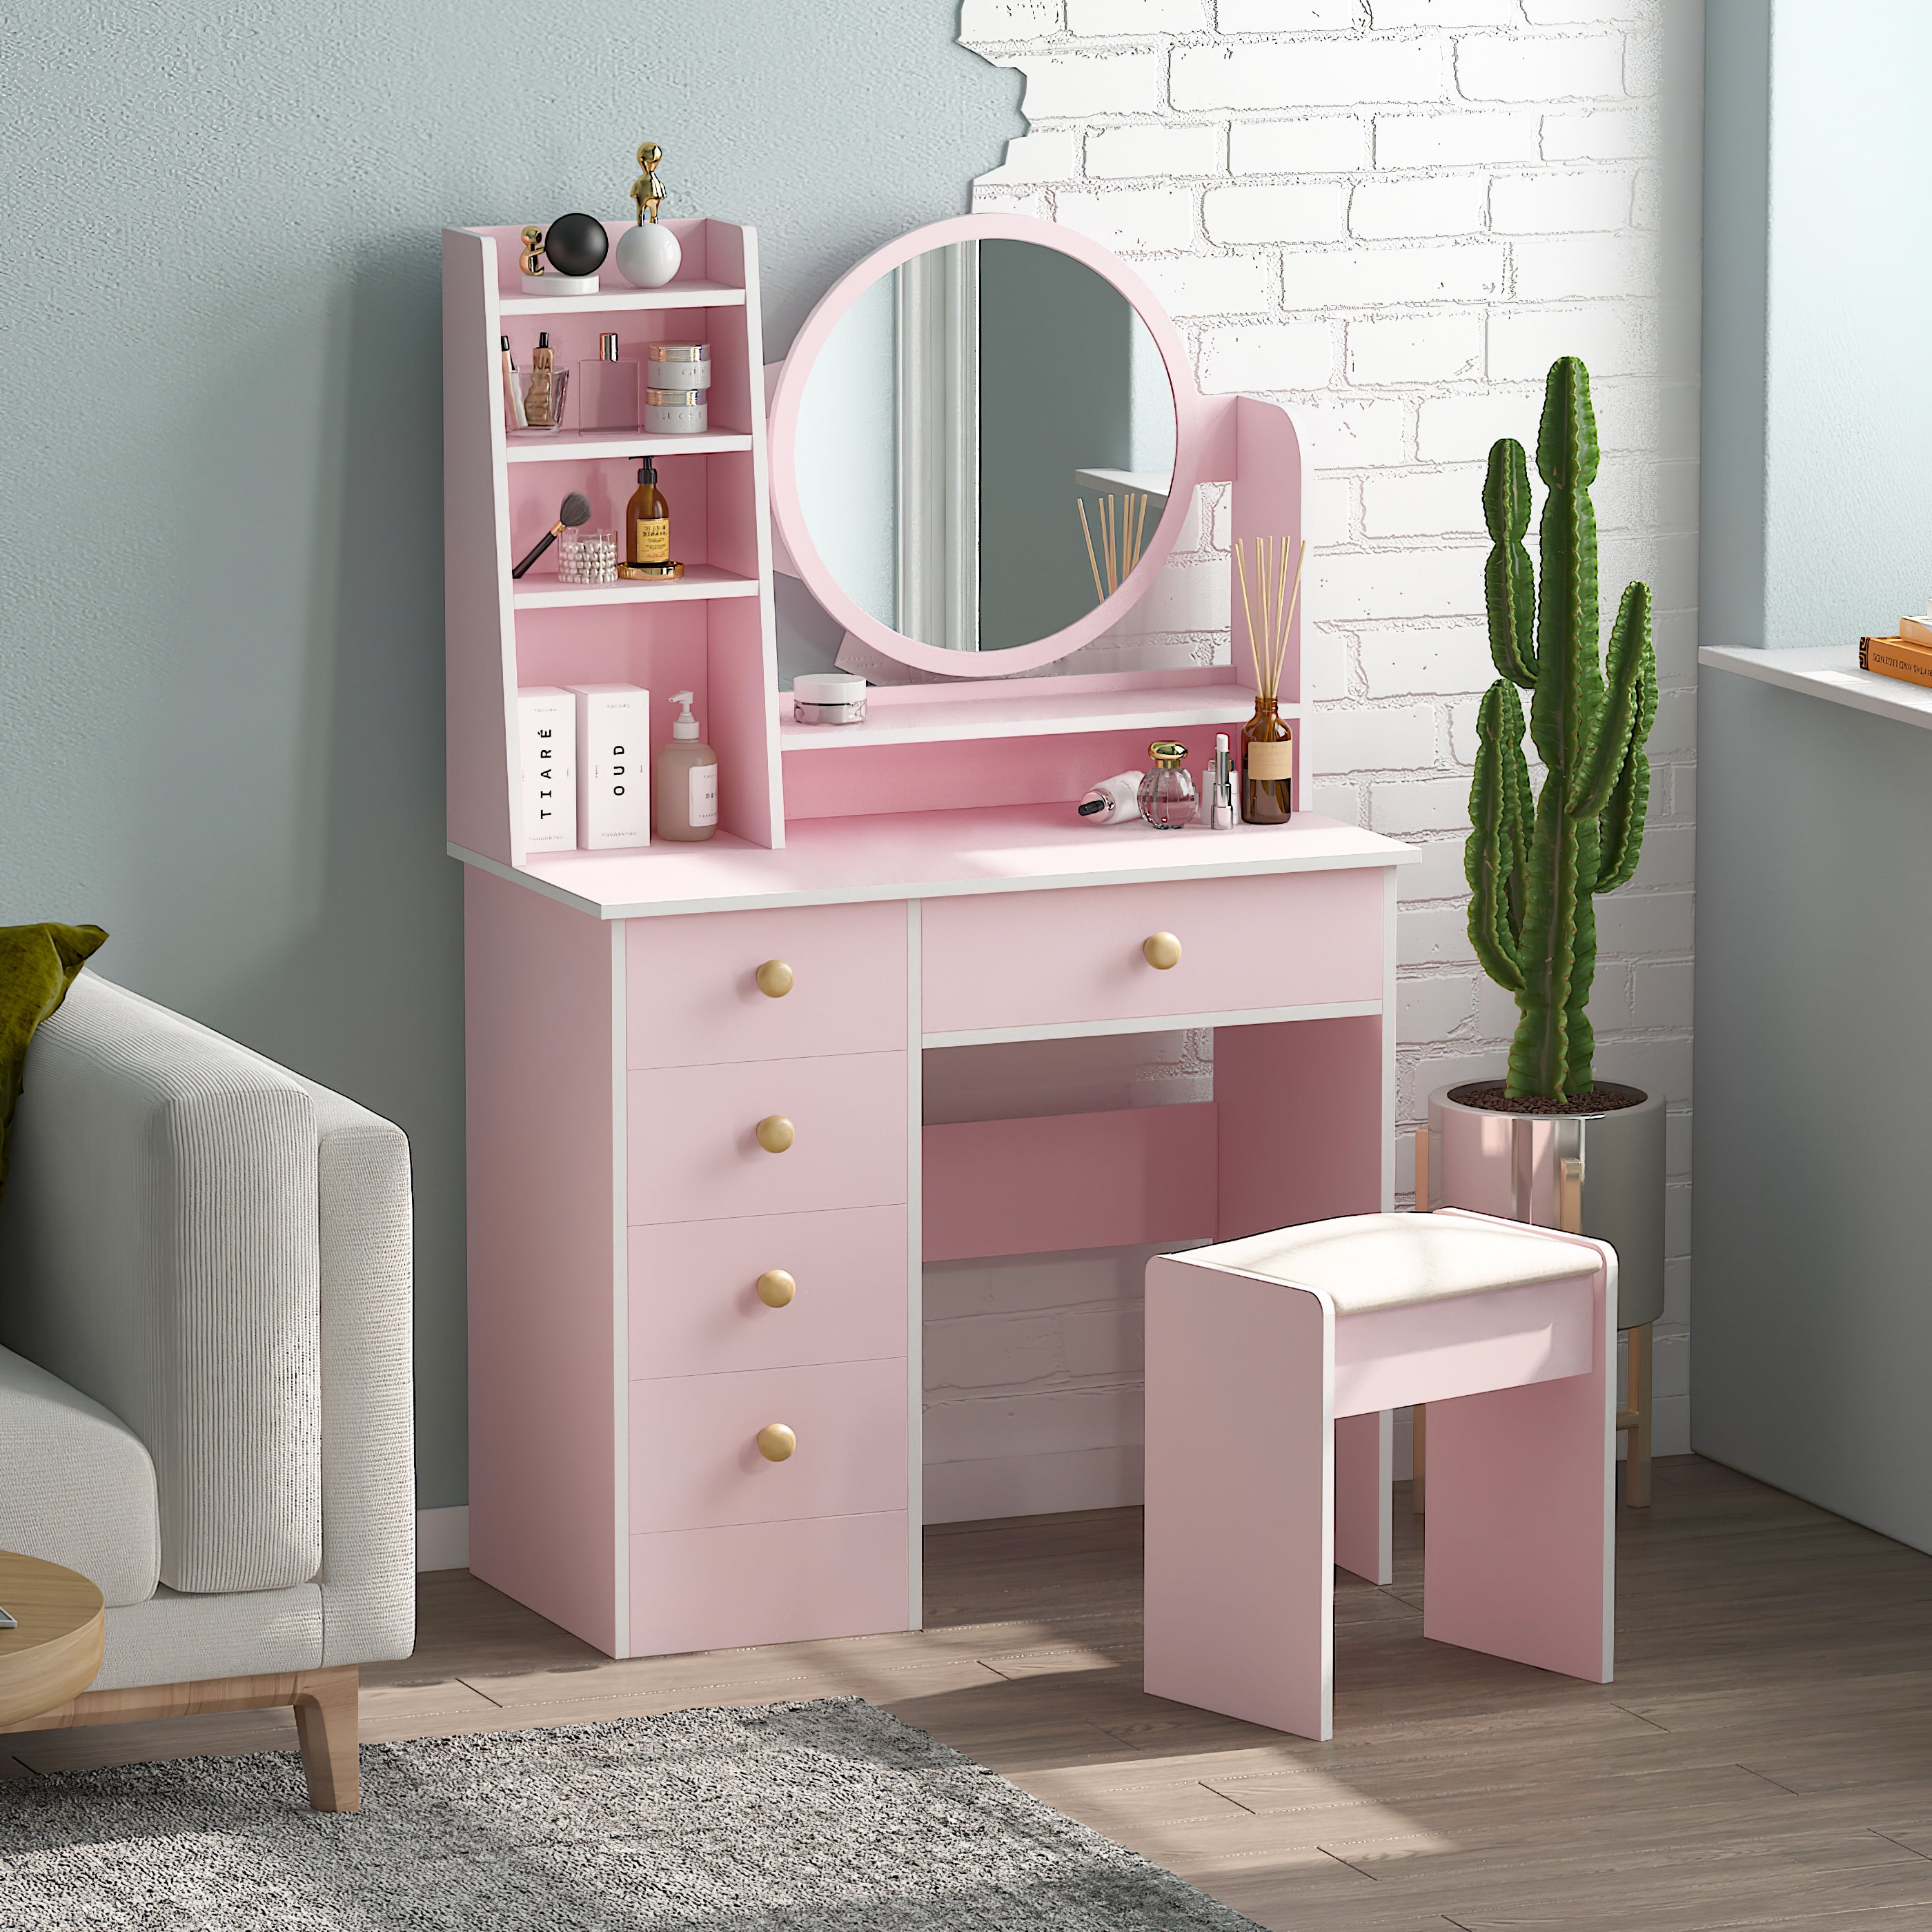 Details about   Vanity Table Set Makeup Dressing Table Kids Girls Stool Mirror with Drawer Pink 